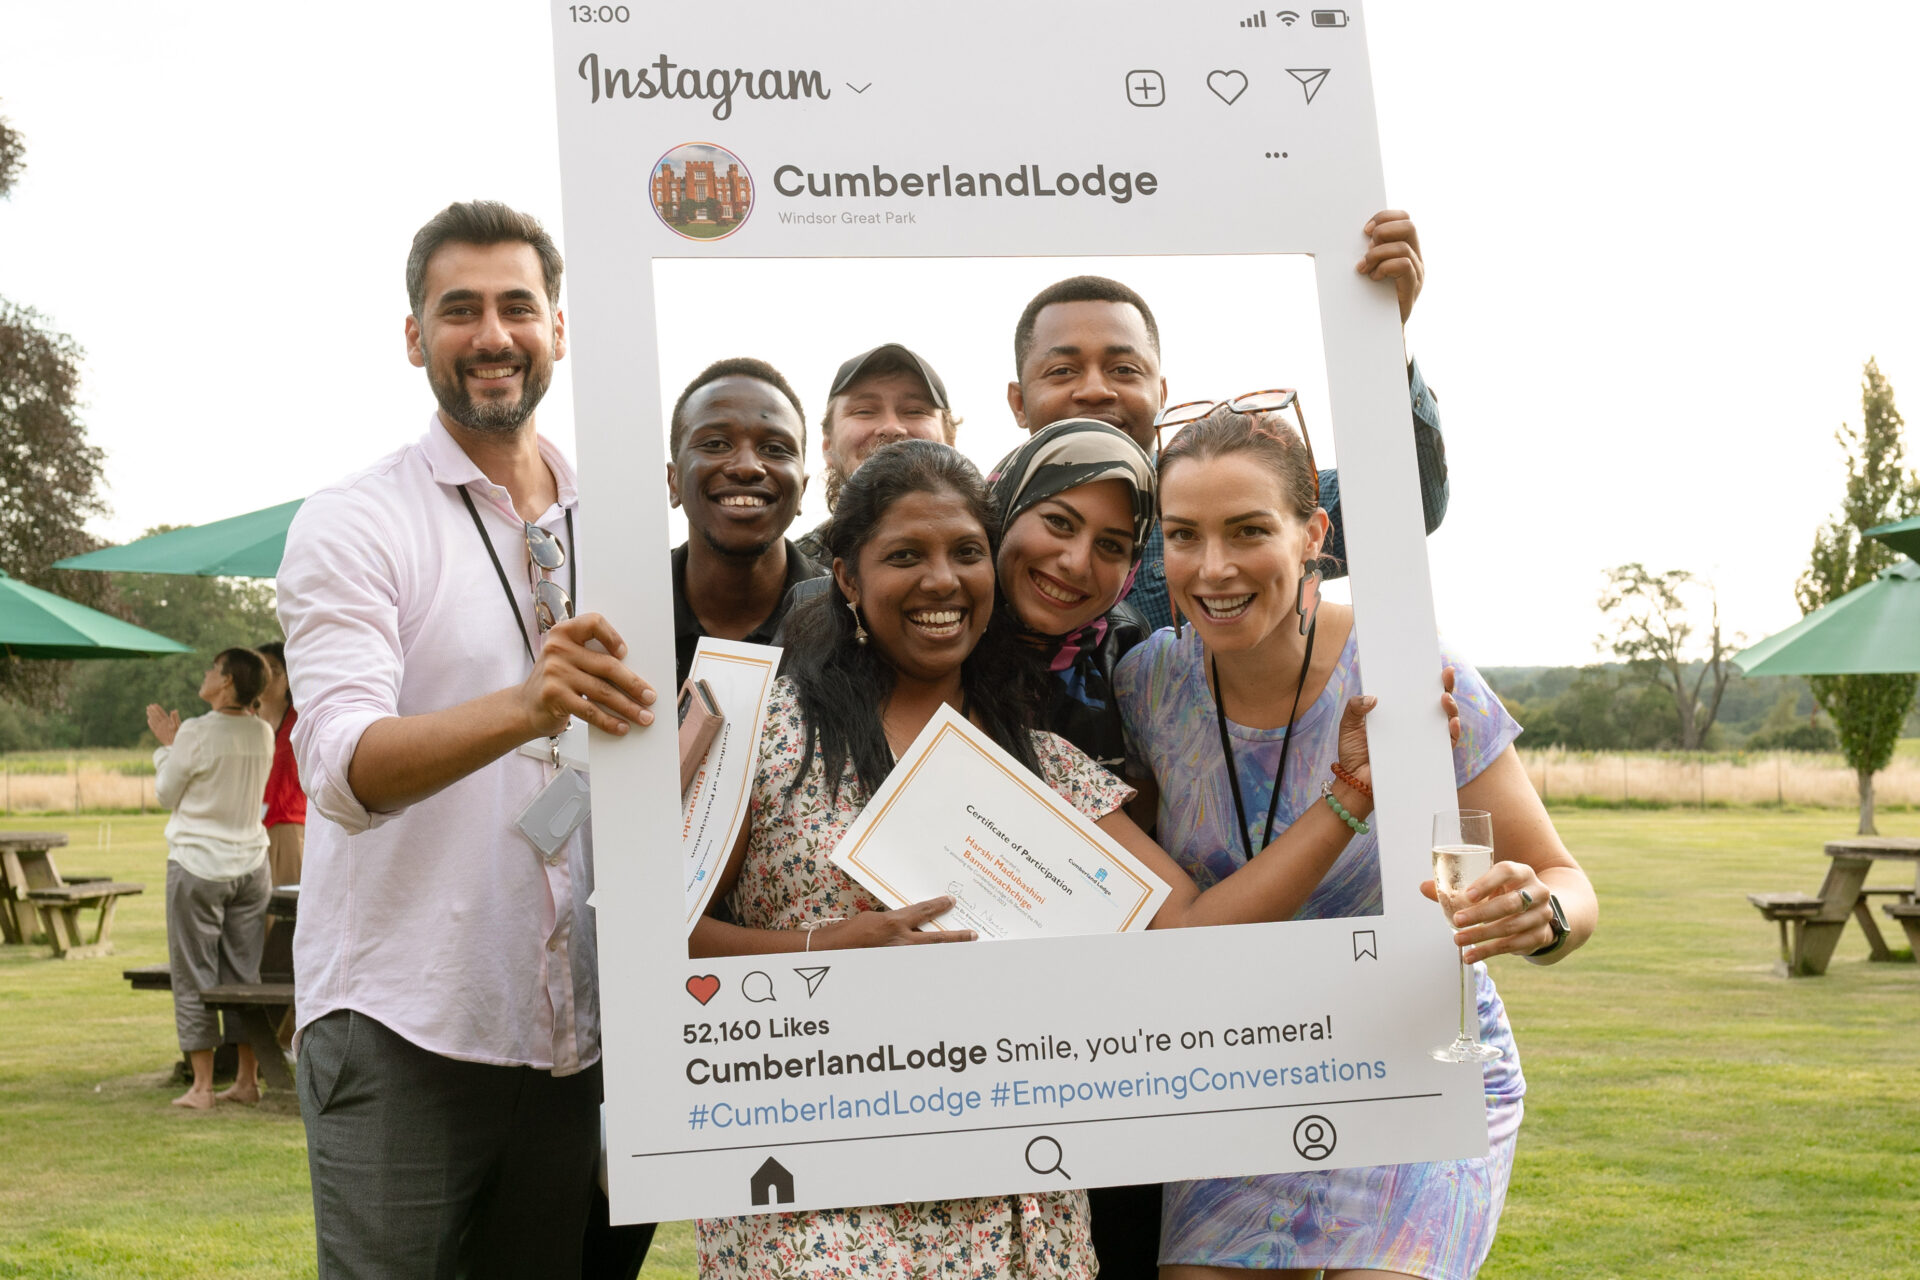 A group of students poses within a frame designed to look like an Instagram post.